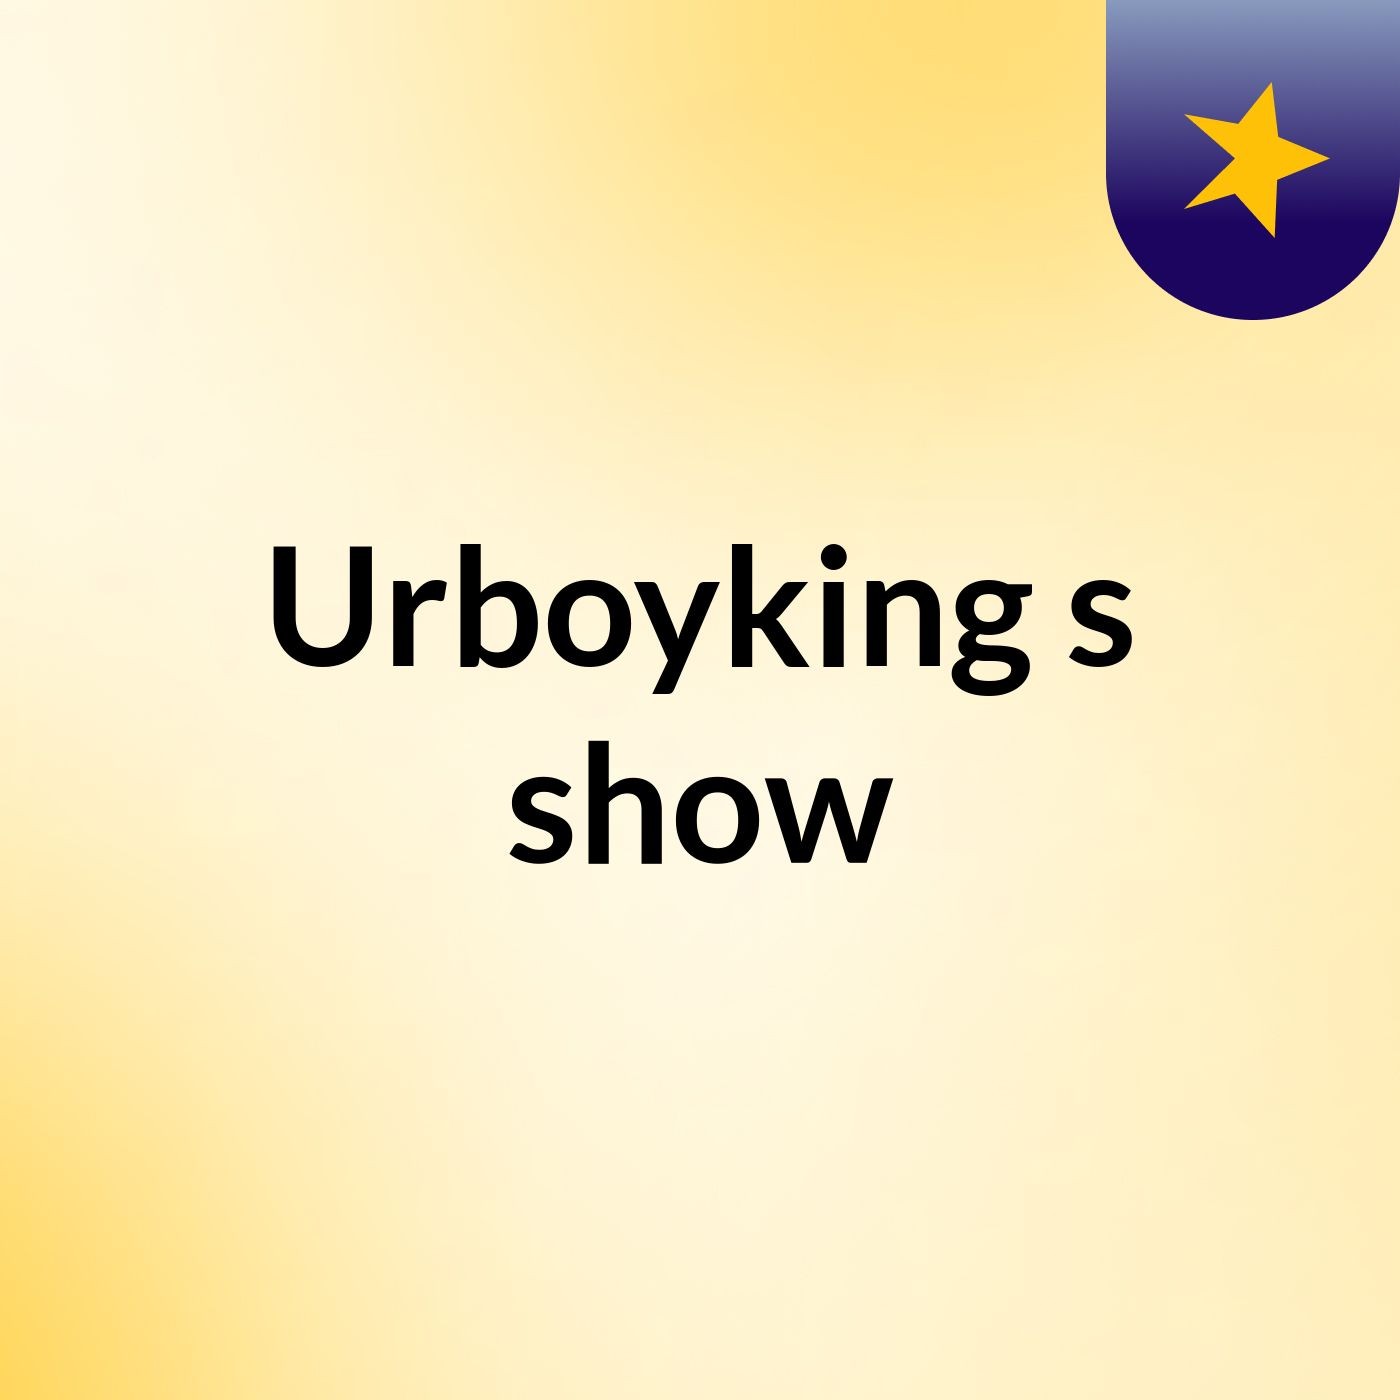 Urboyking's show